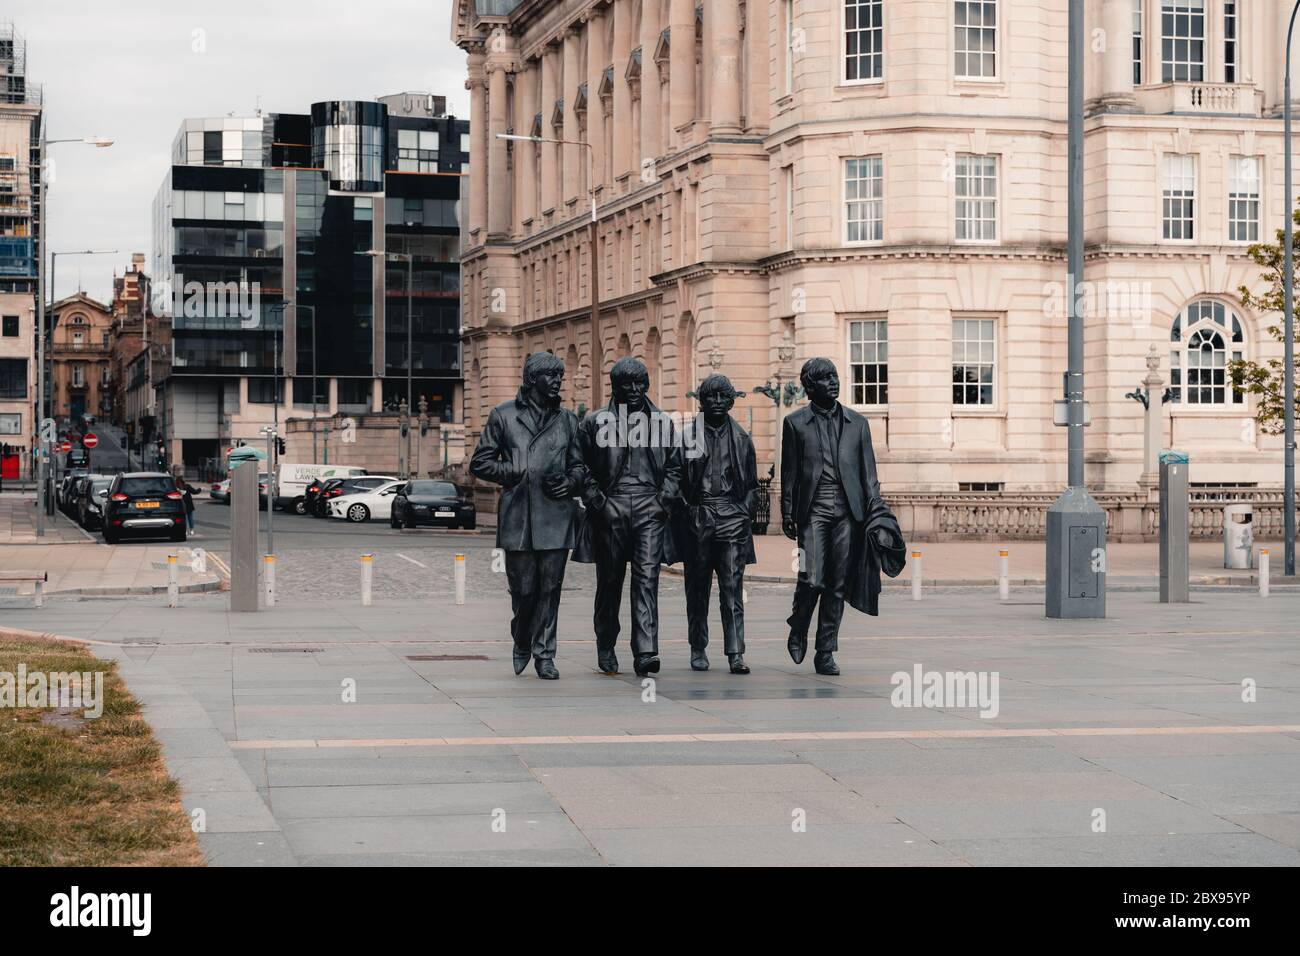 Liverpool, United Kingdom, June 2020: Beatles statues at Liverpool waterfront near the river mersey Stock Photo